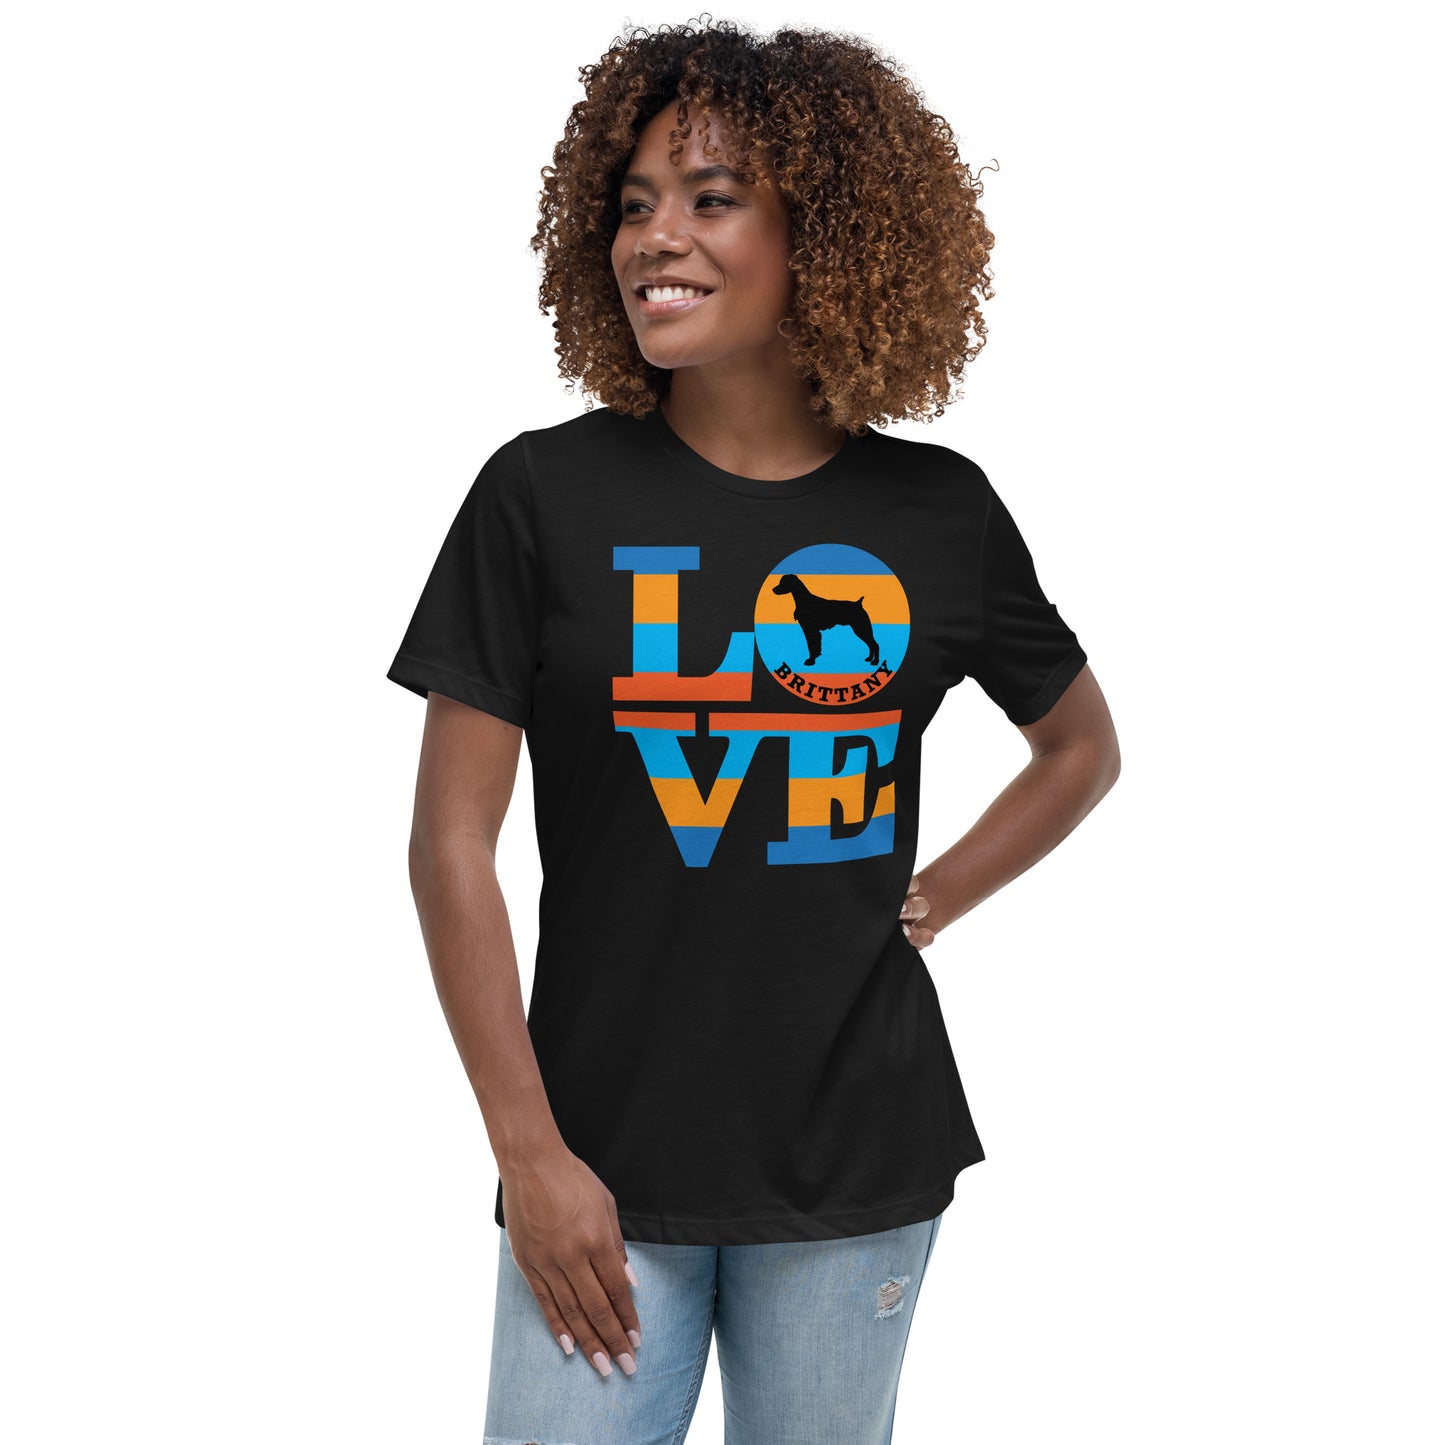 Brittany Love women’s black t-shirt by Dog Artistry.